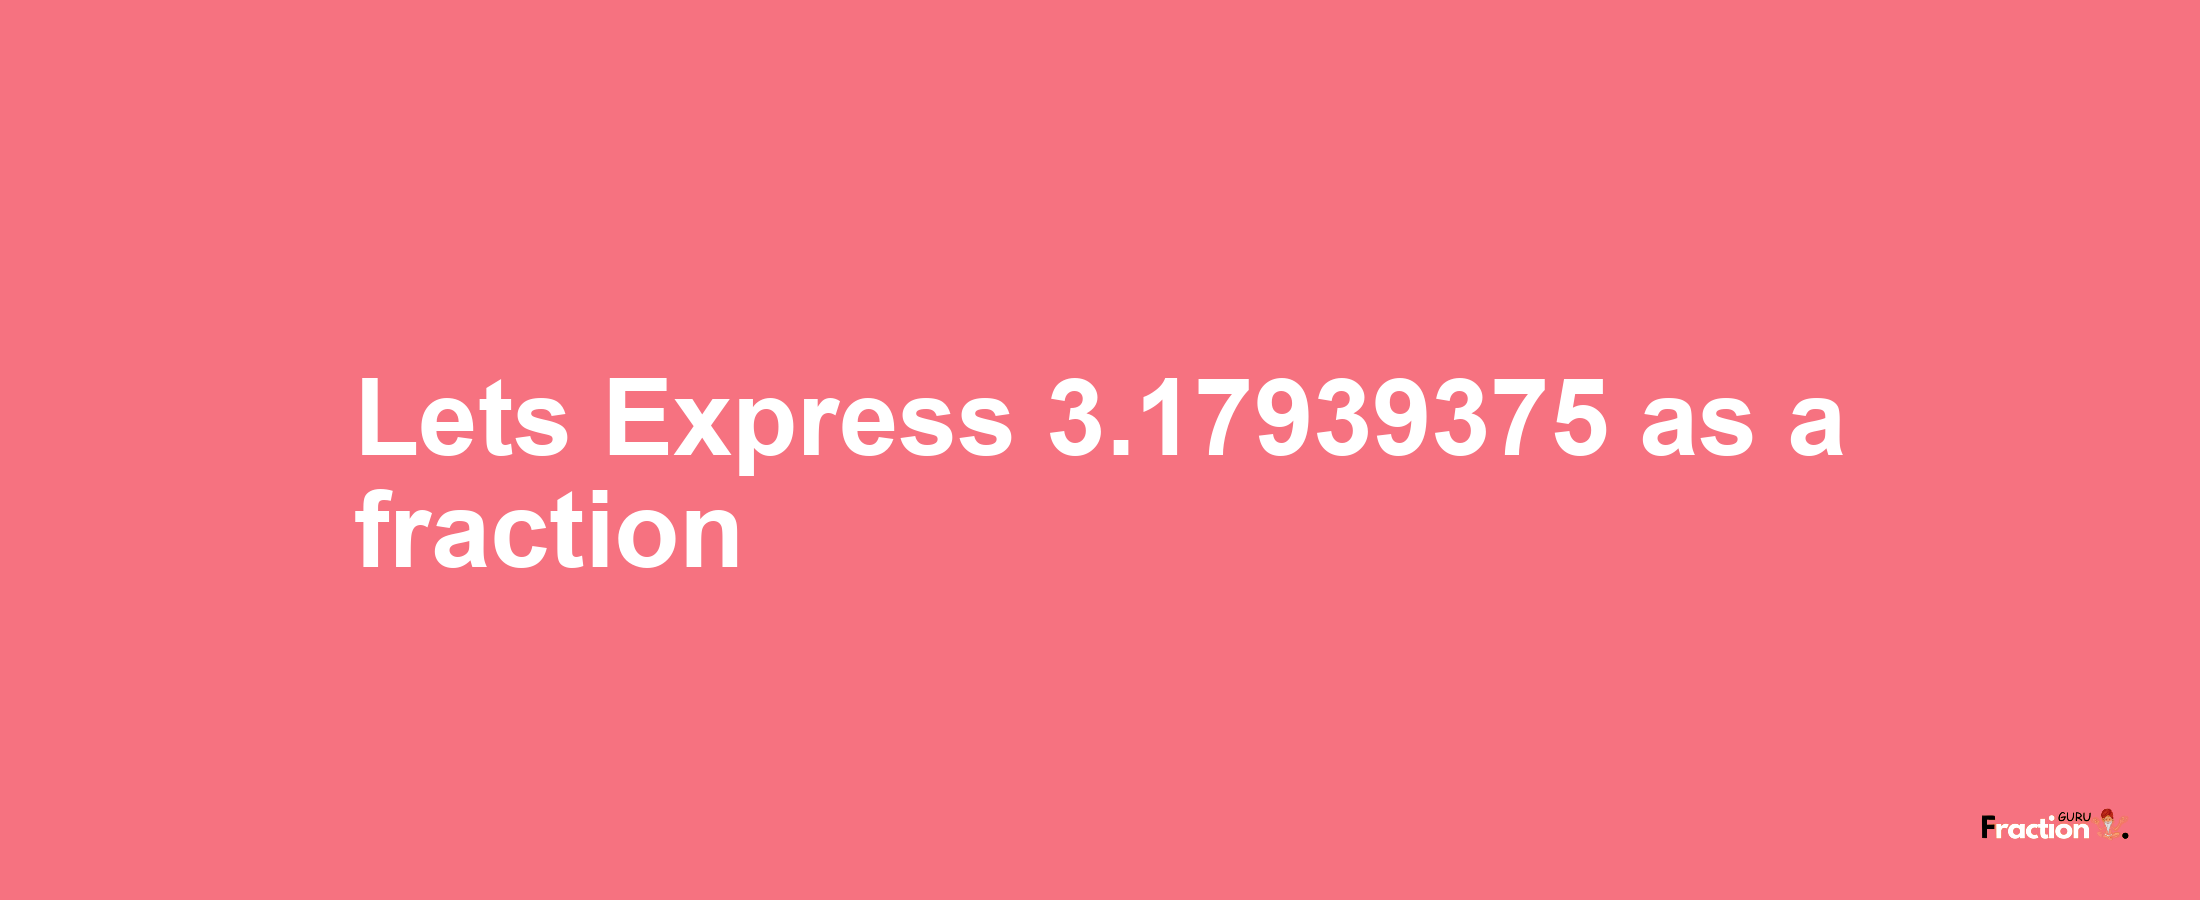 Lets Express 3.17939375 as afraction